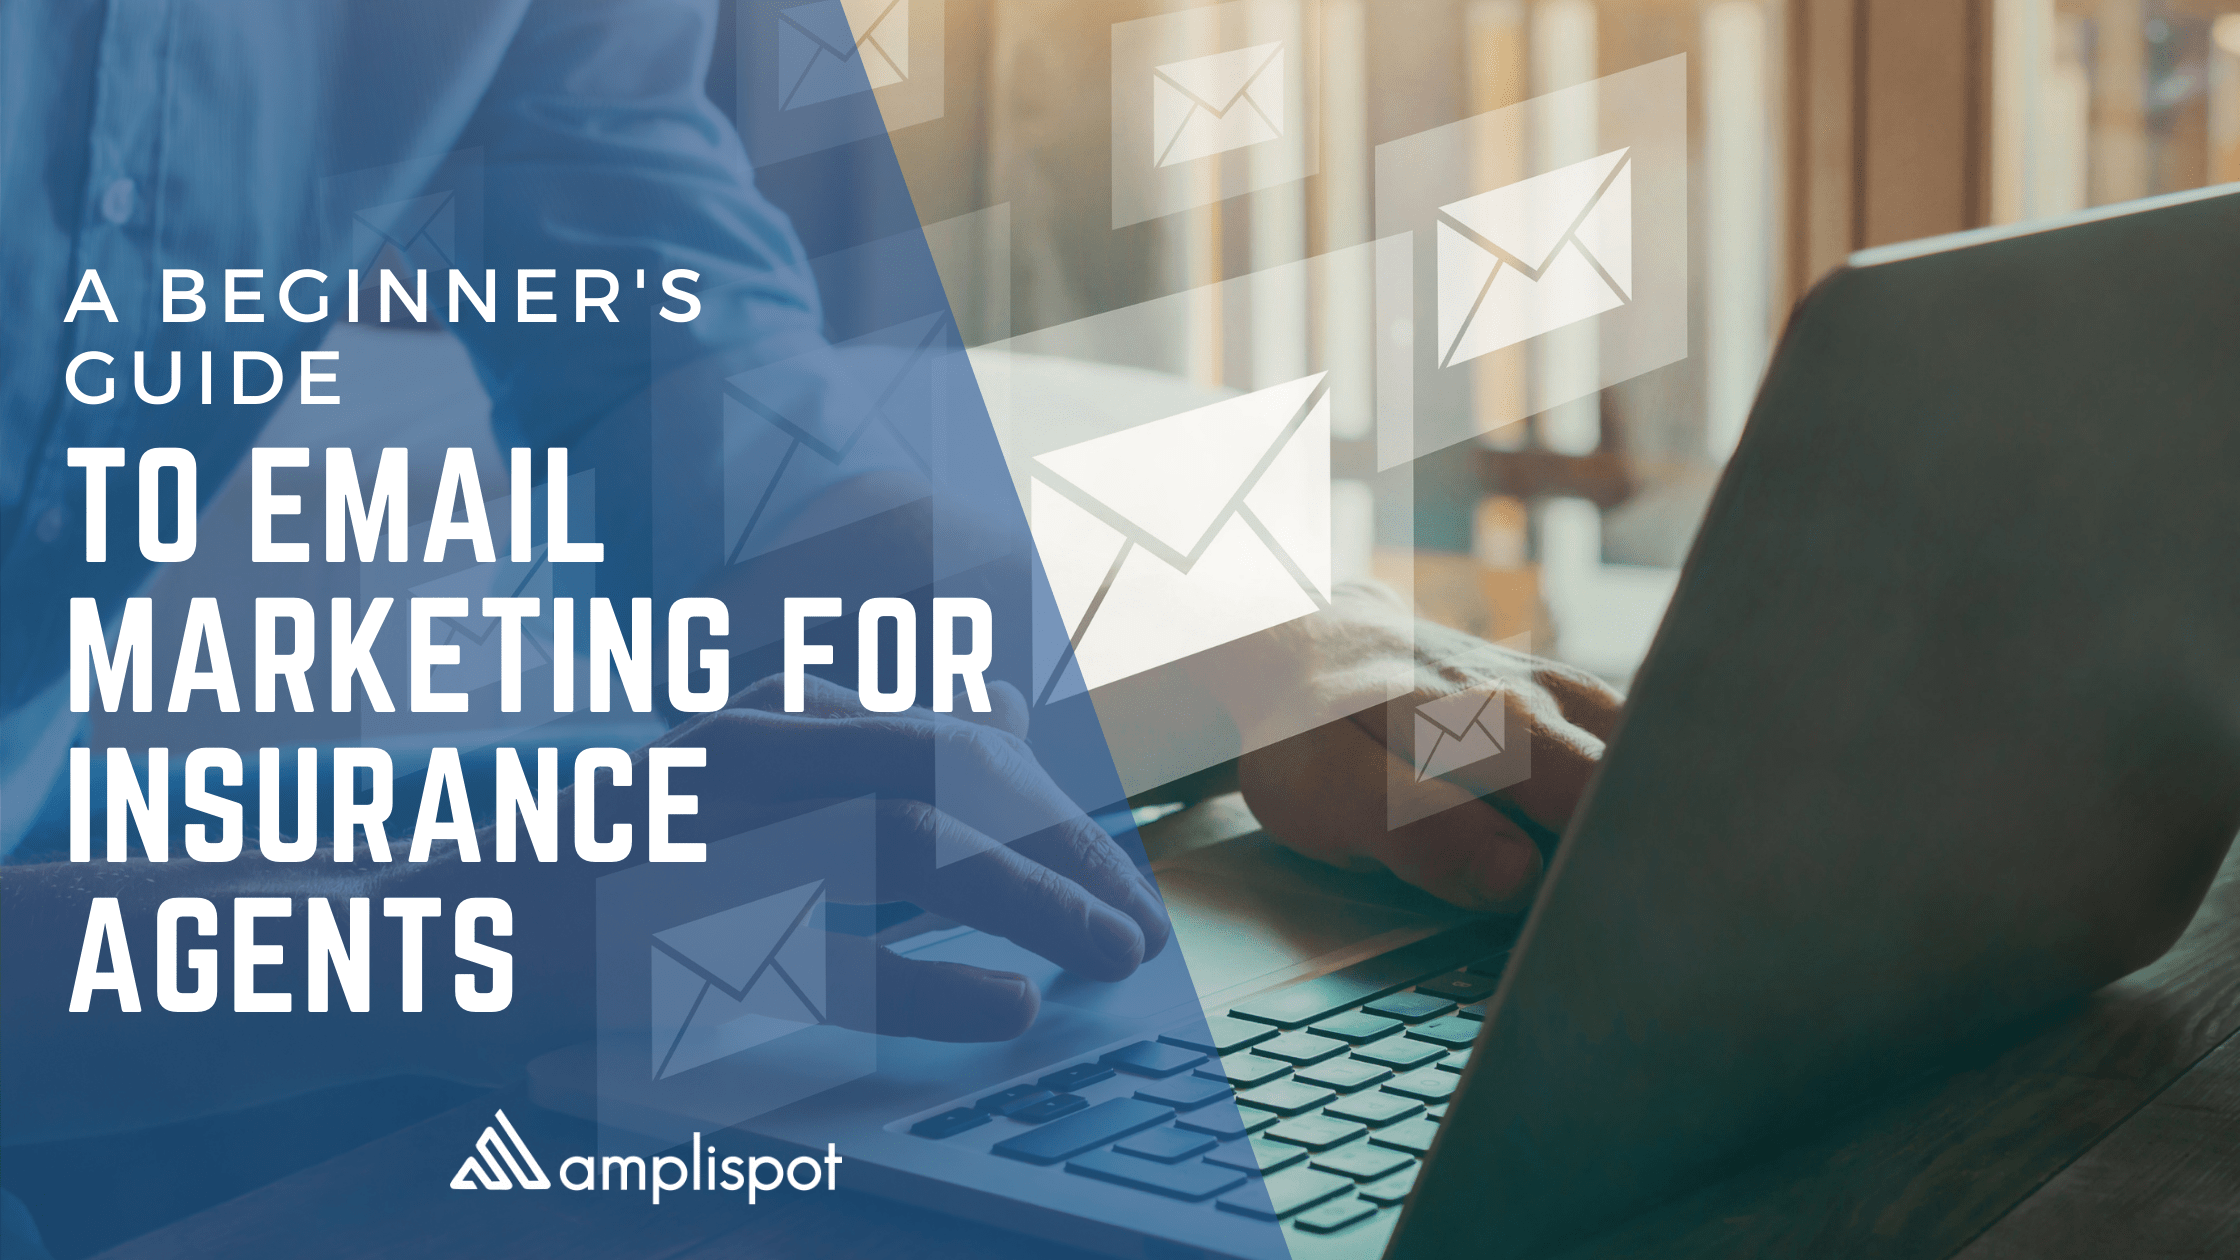 A Beginner's Guide to Email Marketing For Insurance Agents